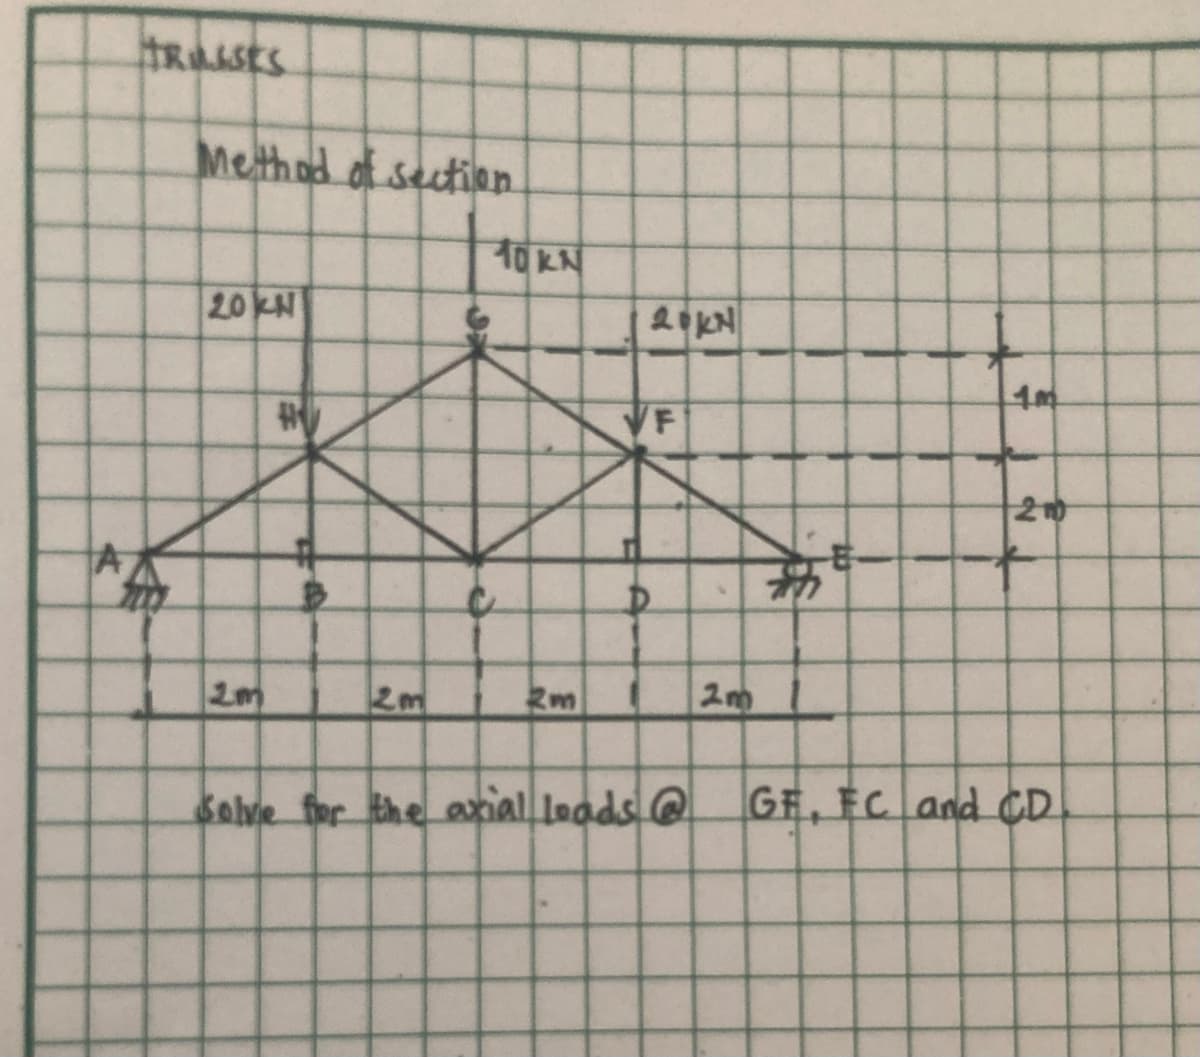 TRUSSES
Method of section
A
20KN
L
10KN
20KN
the
F
D
#
2m
2m
2m
2m
solve for the axial loads @
10
1m
2
GE, EC and CD